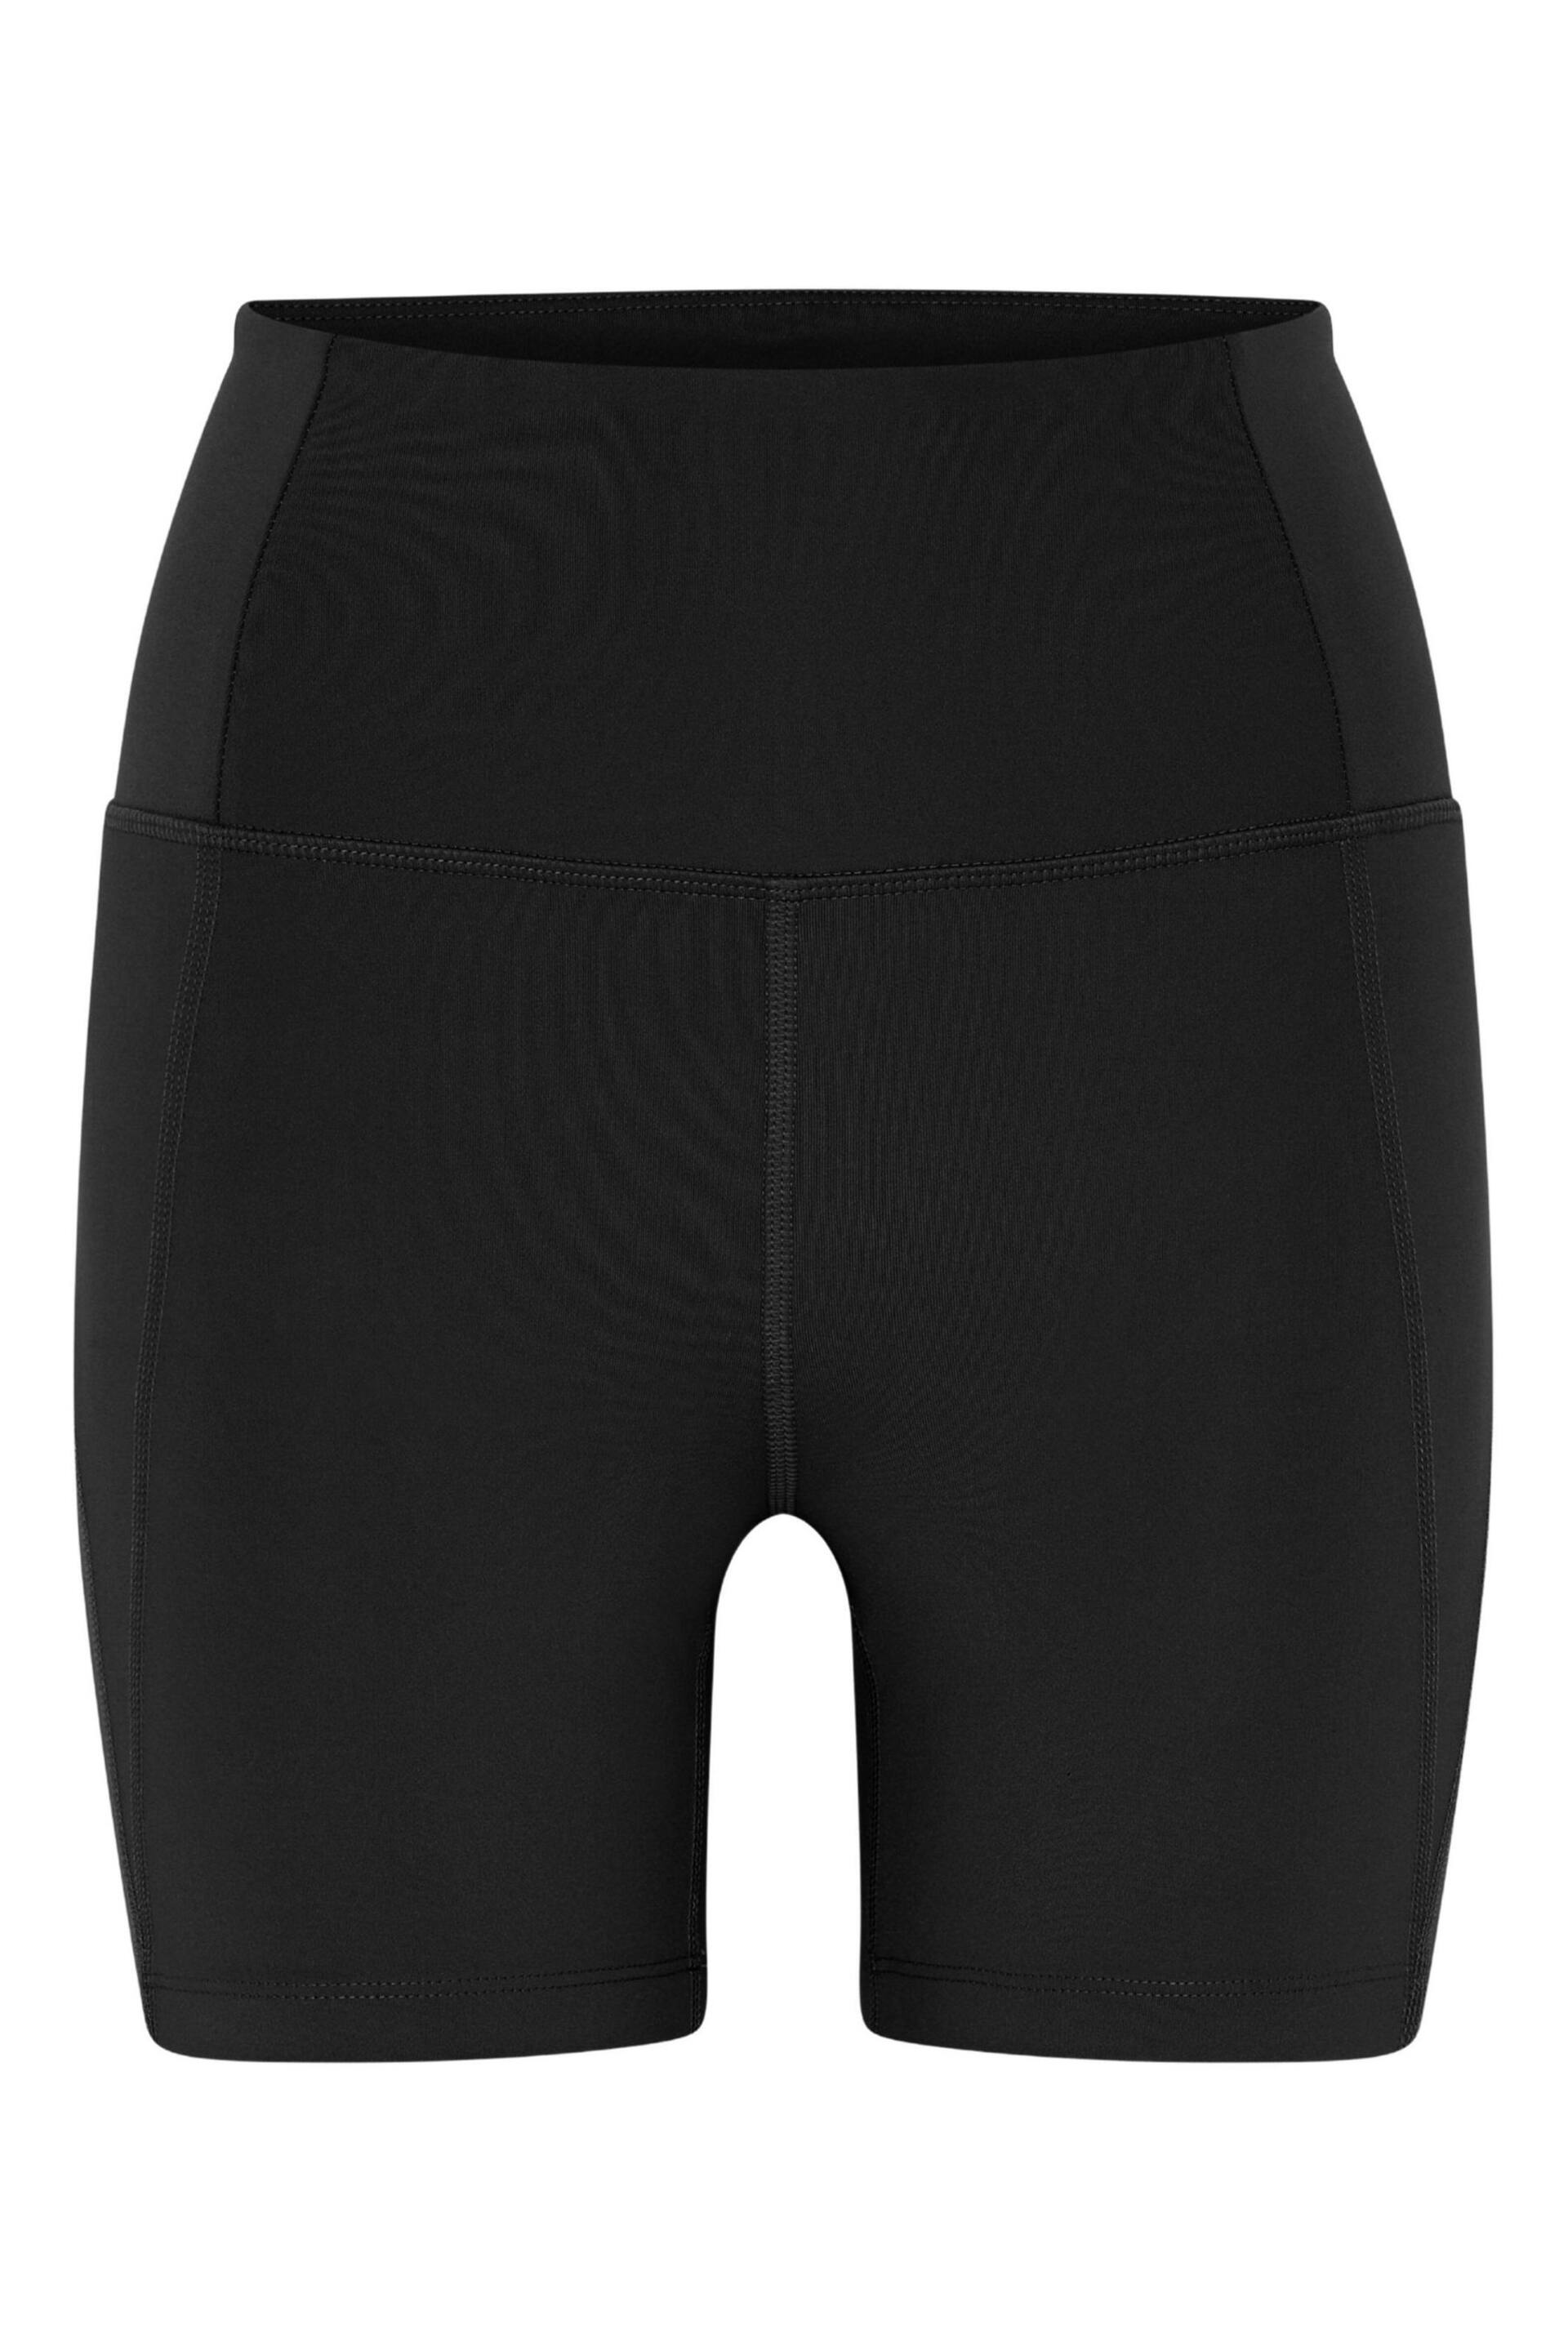 Girlfriend Collective High Rise Run Shorts - Image 8 of 10